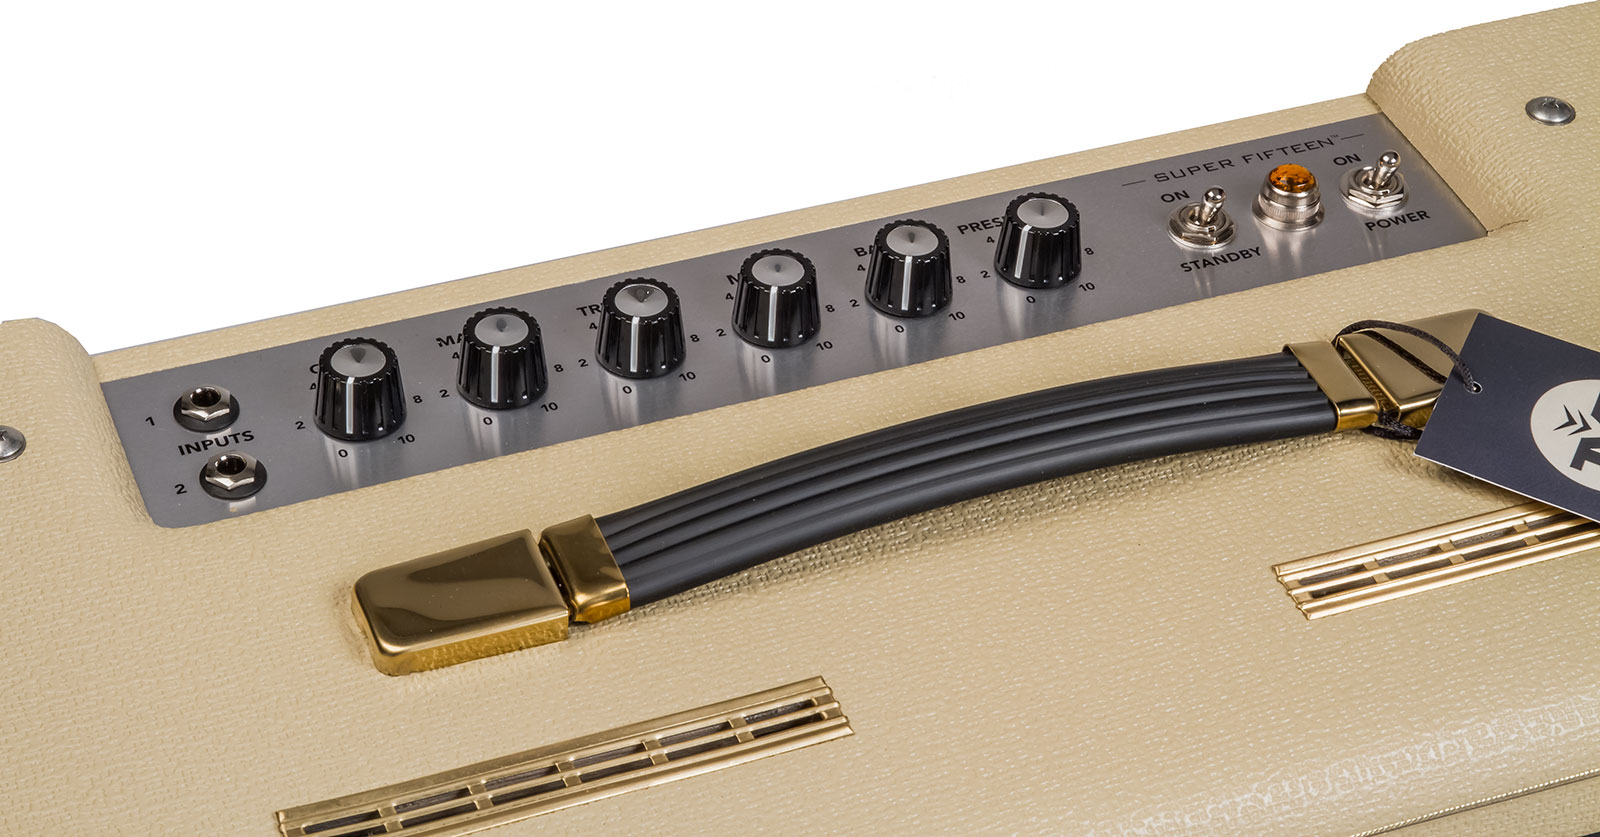 Magnatone Master Collection Super Fifteen Combo 15w 1x12 Gold - Electric guitar combo amp - Variation 2